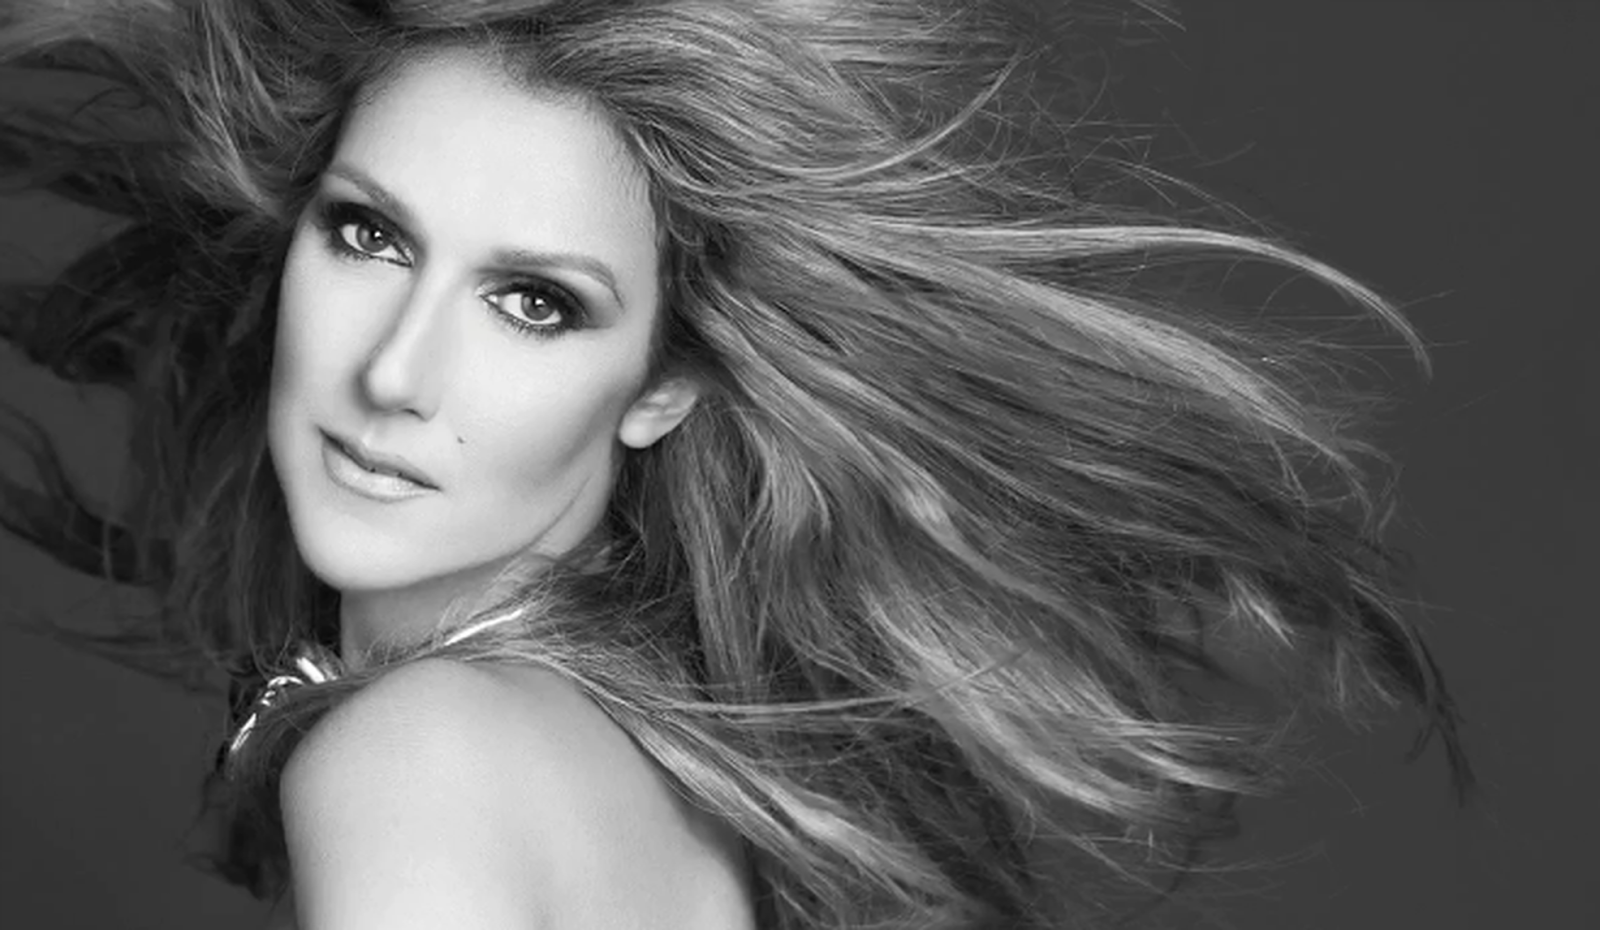 The Power Of Love - Celine Dion: Celine Dion in 7 Hollywood Magazine 2012